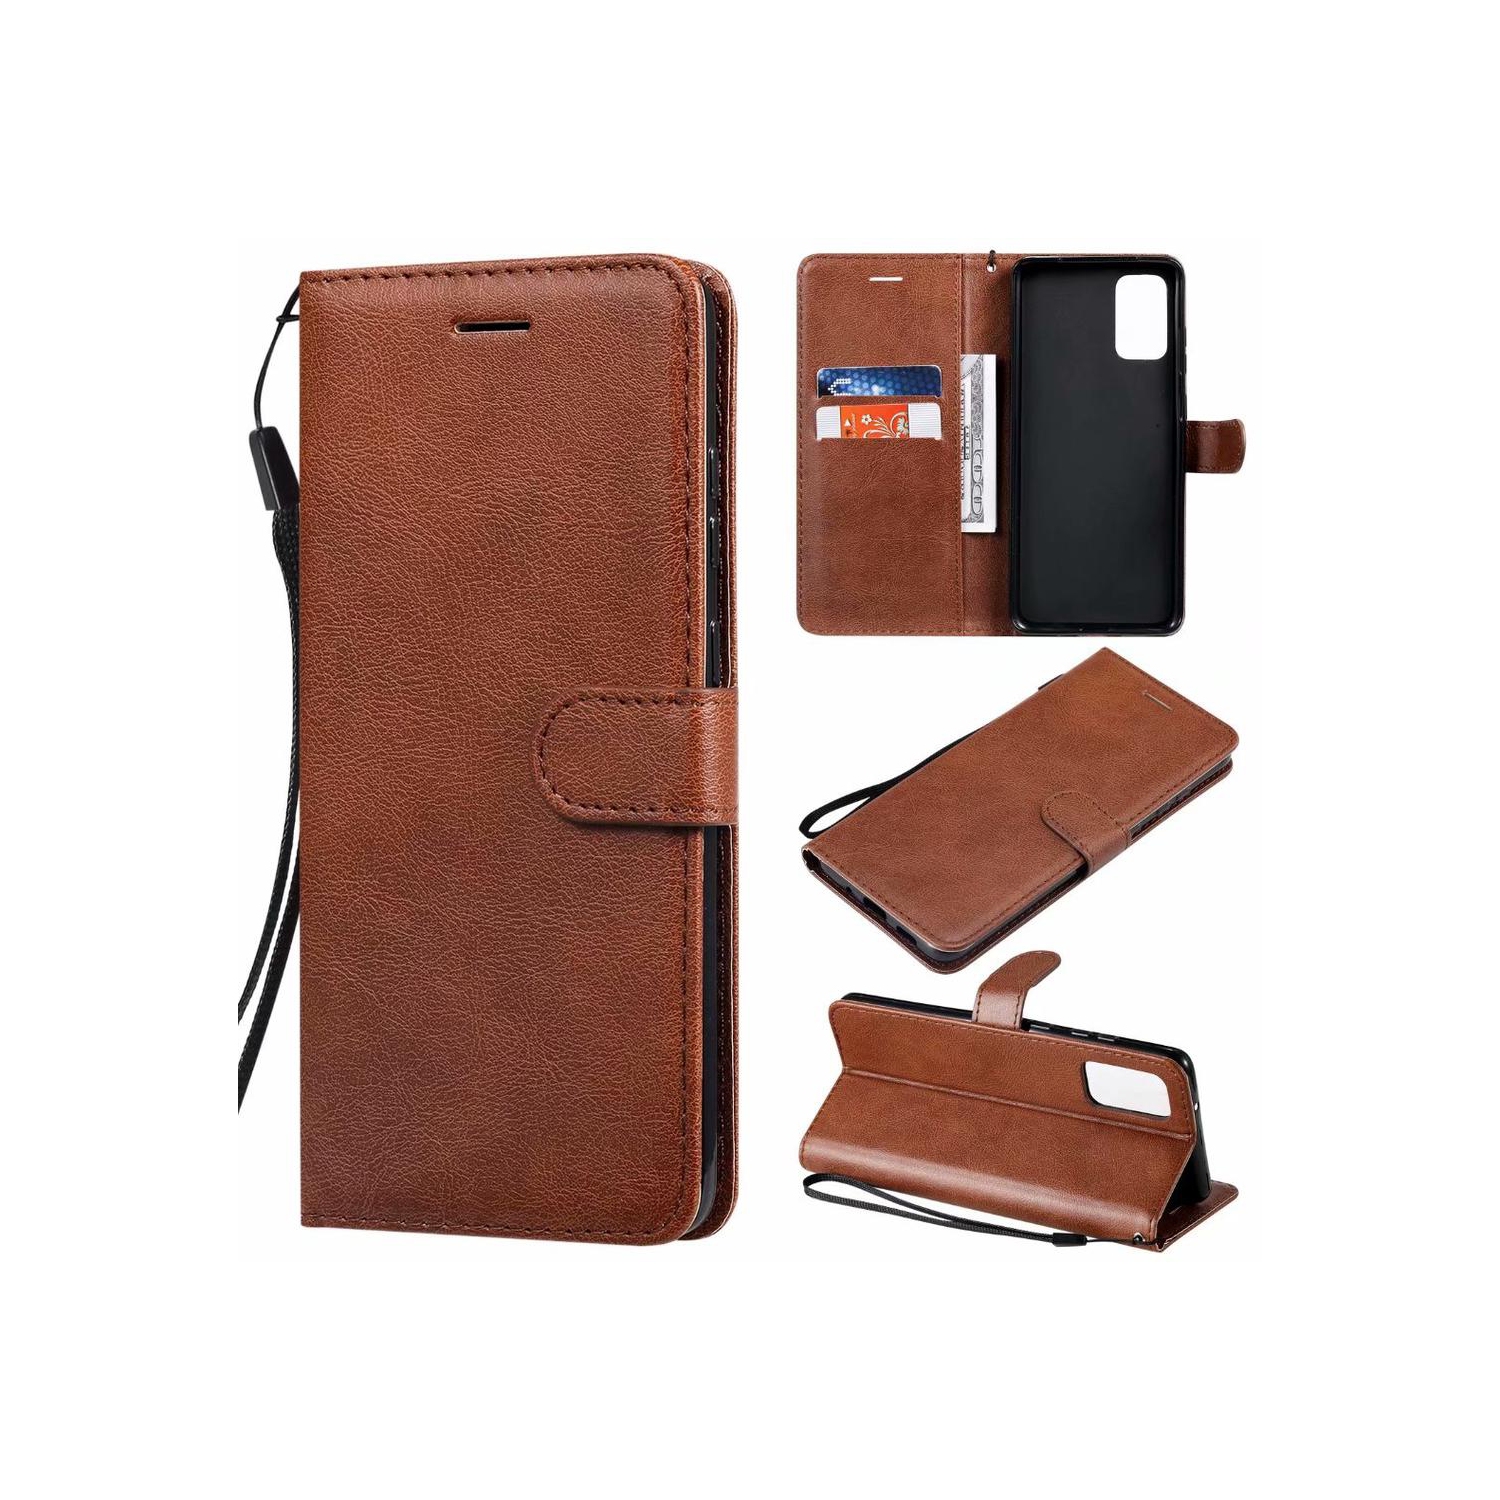 [CS] Samsung Galaxy A32 5G Case, Magnetic Leather Folio Wallet Flip Case Cover with Card Slot, Brown